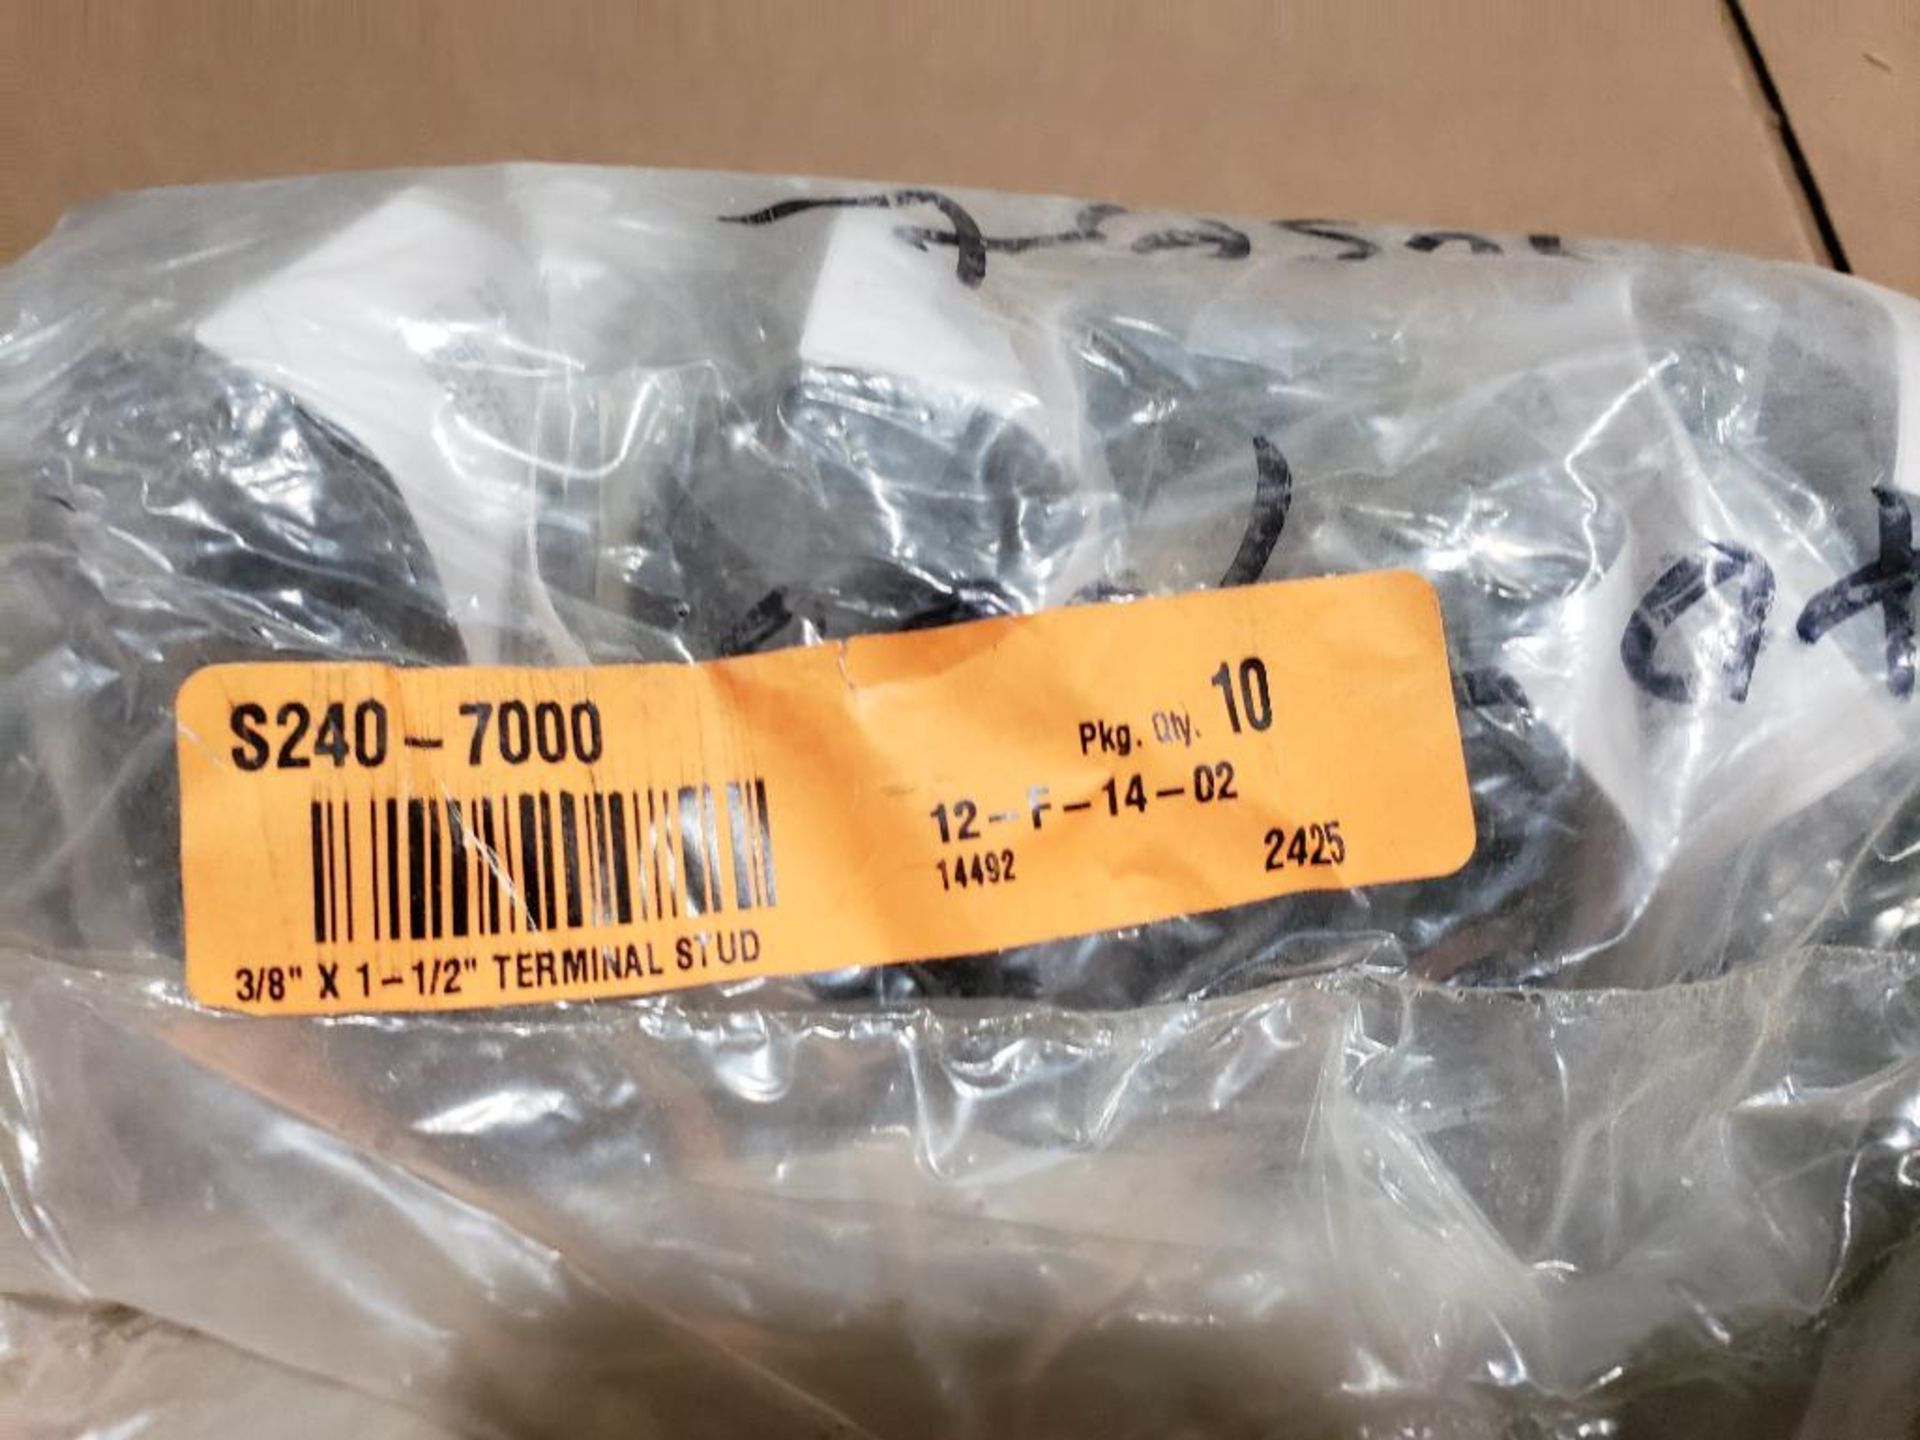 Qty 100 - Riverside single stud battery terminal connector. Part number S240-7000. (10 bags of 10) - Image 3 of 4